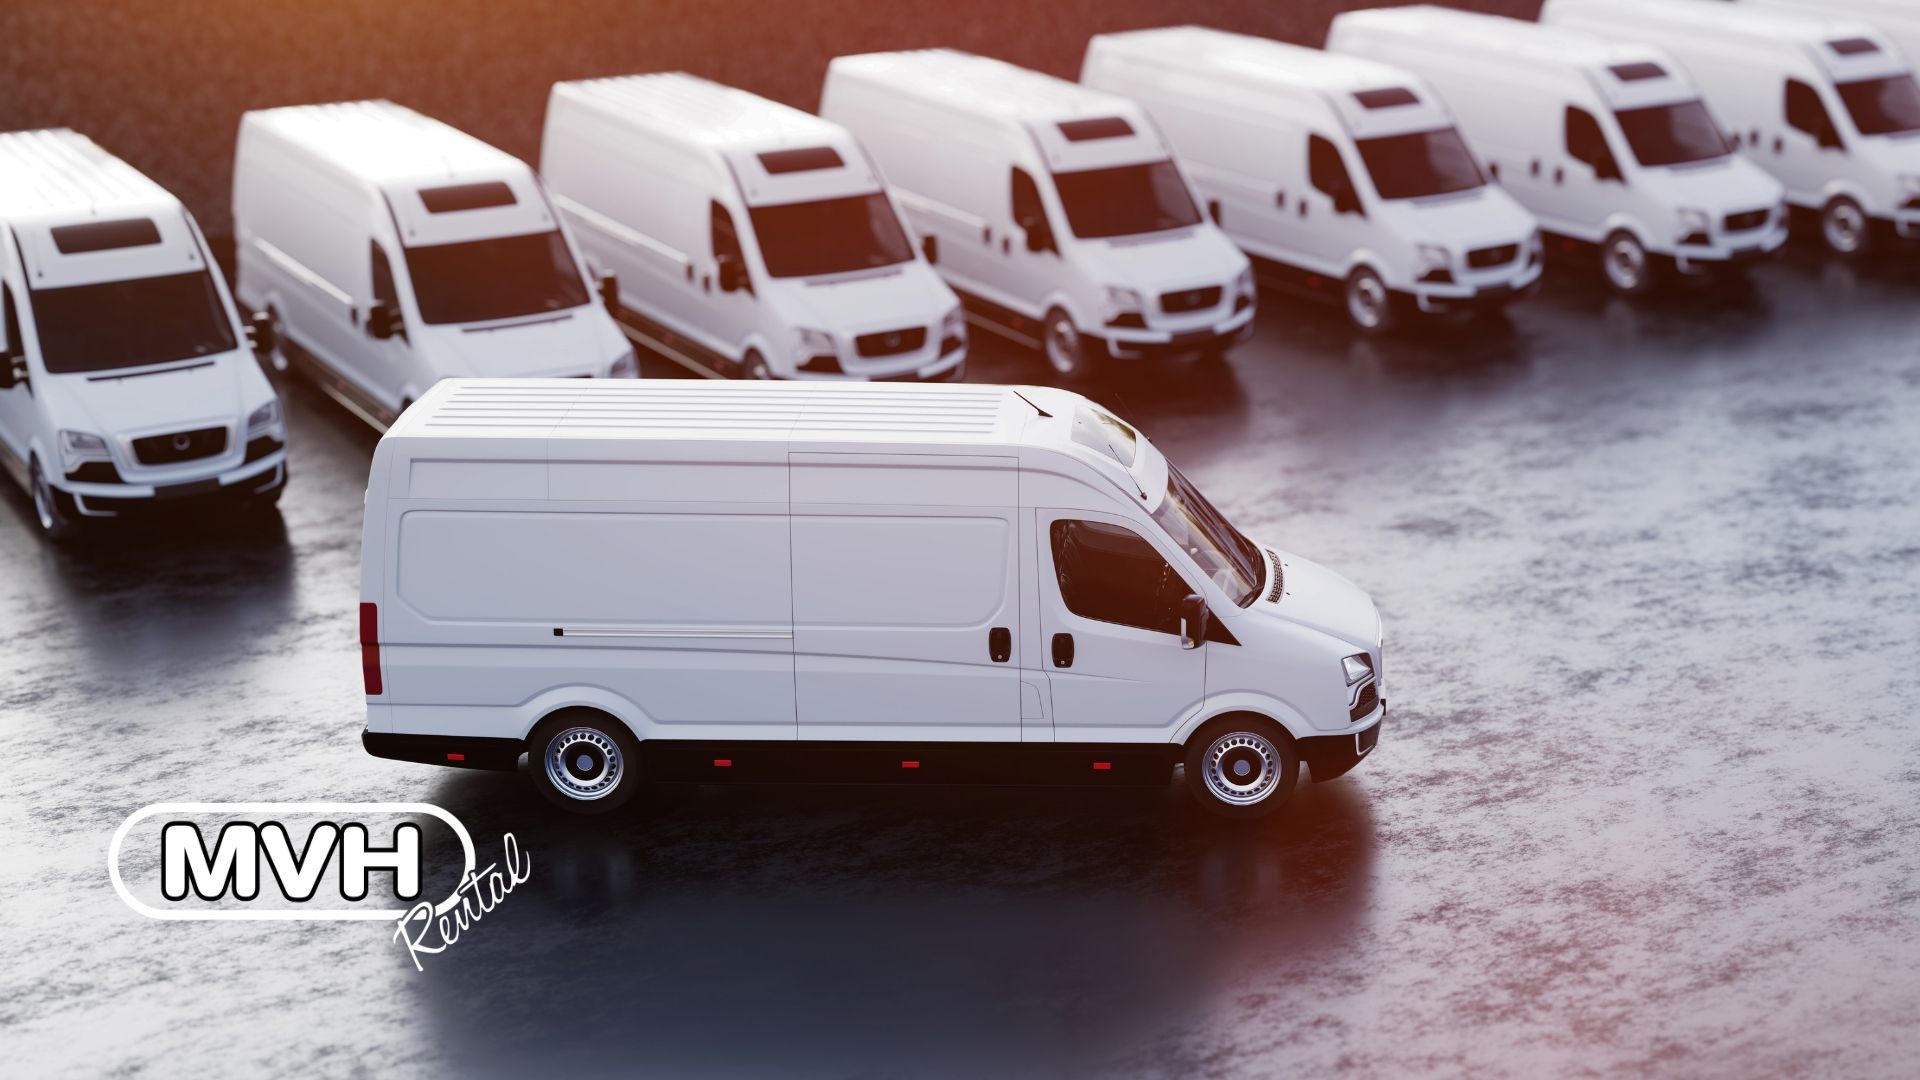 Overseeing a fleet of vehicles comes with many challenges. One solution is to invest in fleet management software. Read on to find out what to look for.